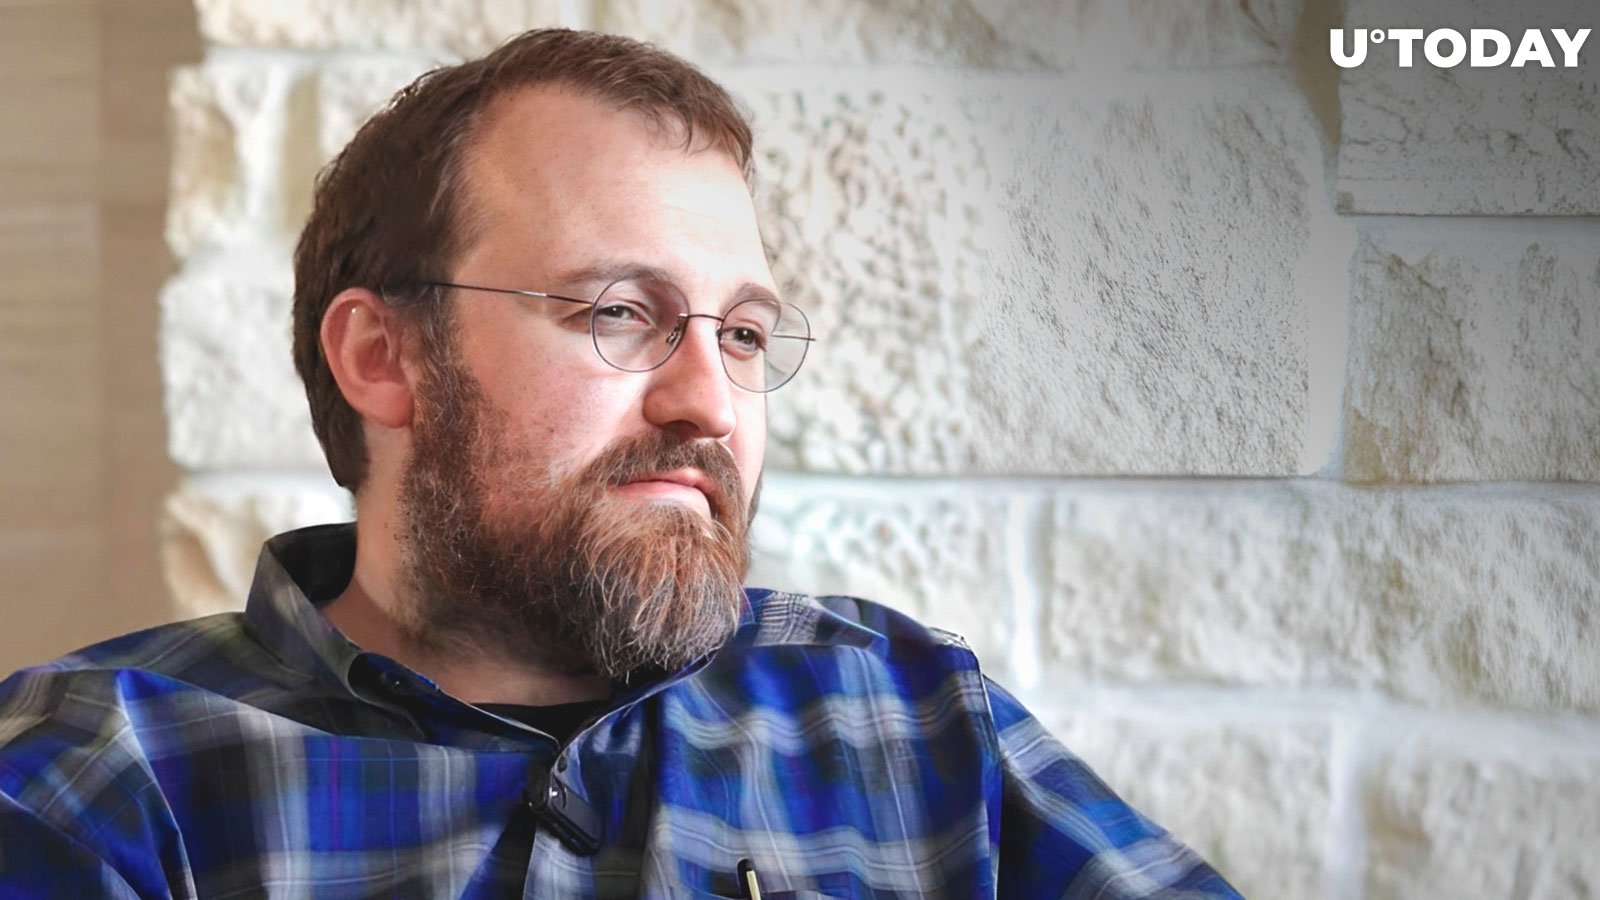 Cardano Founder Charles Hoskinson Refutes Claims of Abandoned Projects